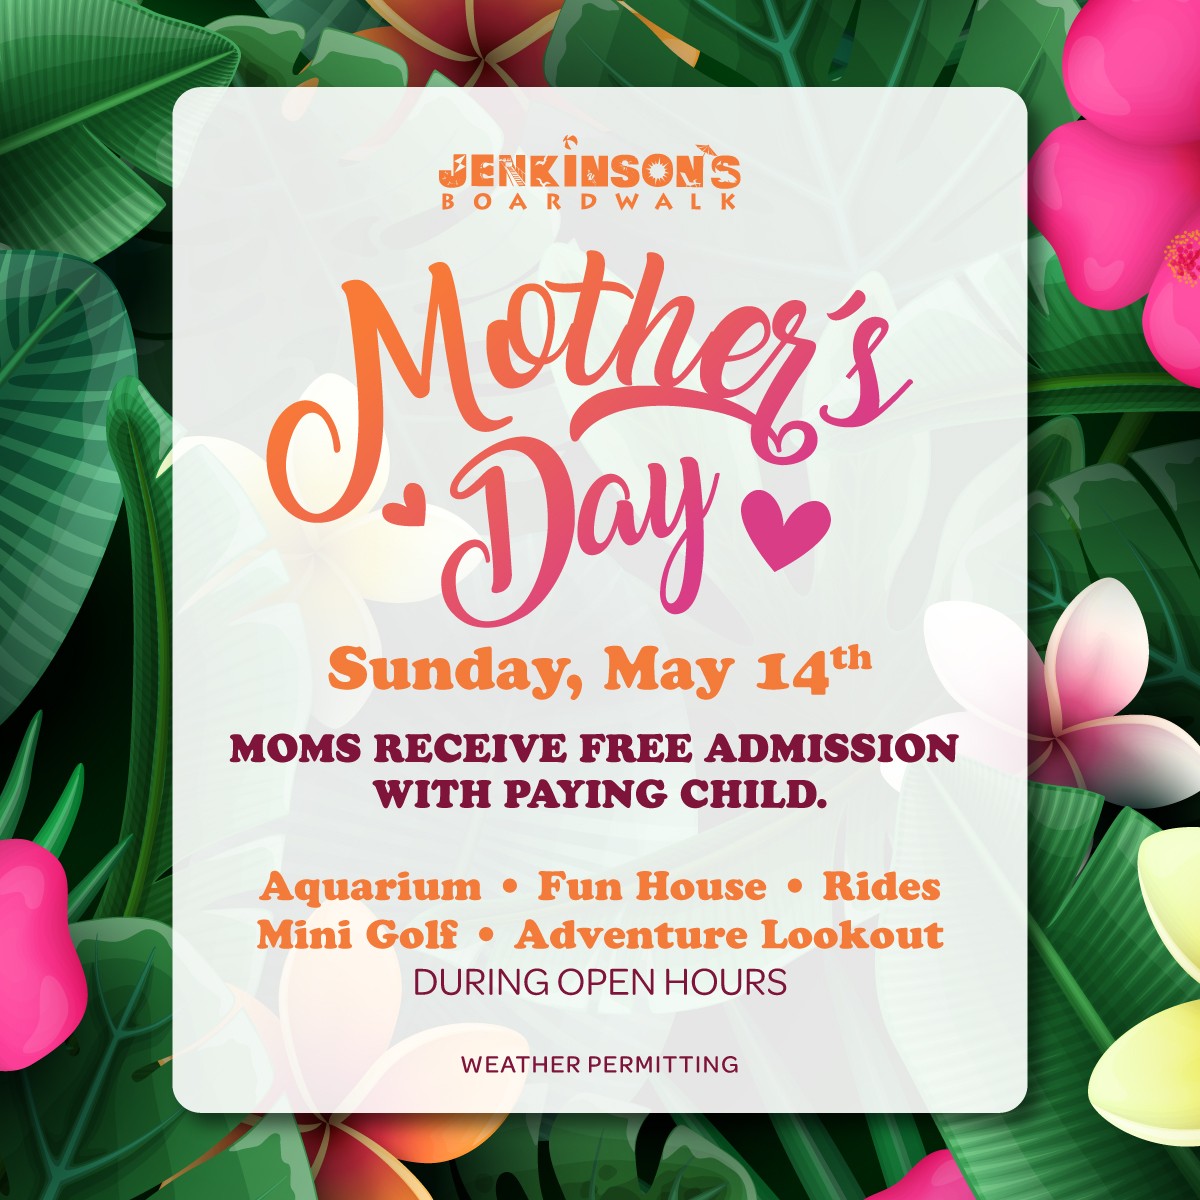 mothers day at jenkinson's boardwalk on sunday may 14th